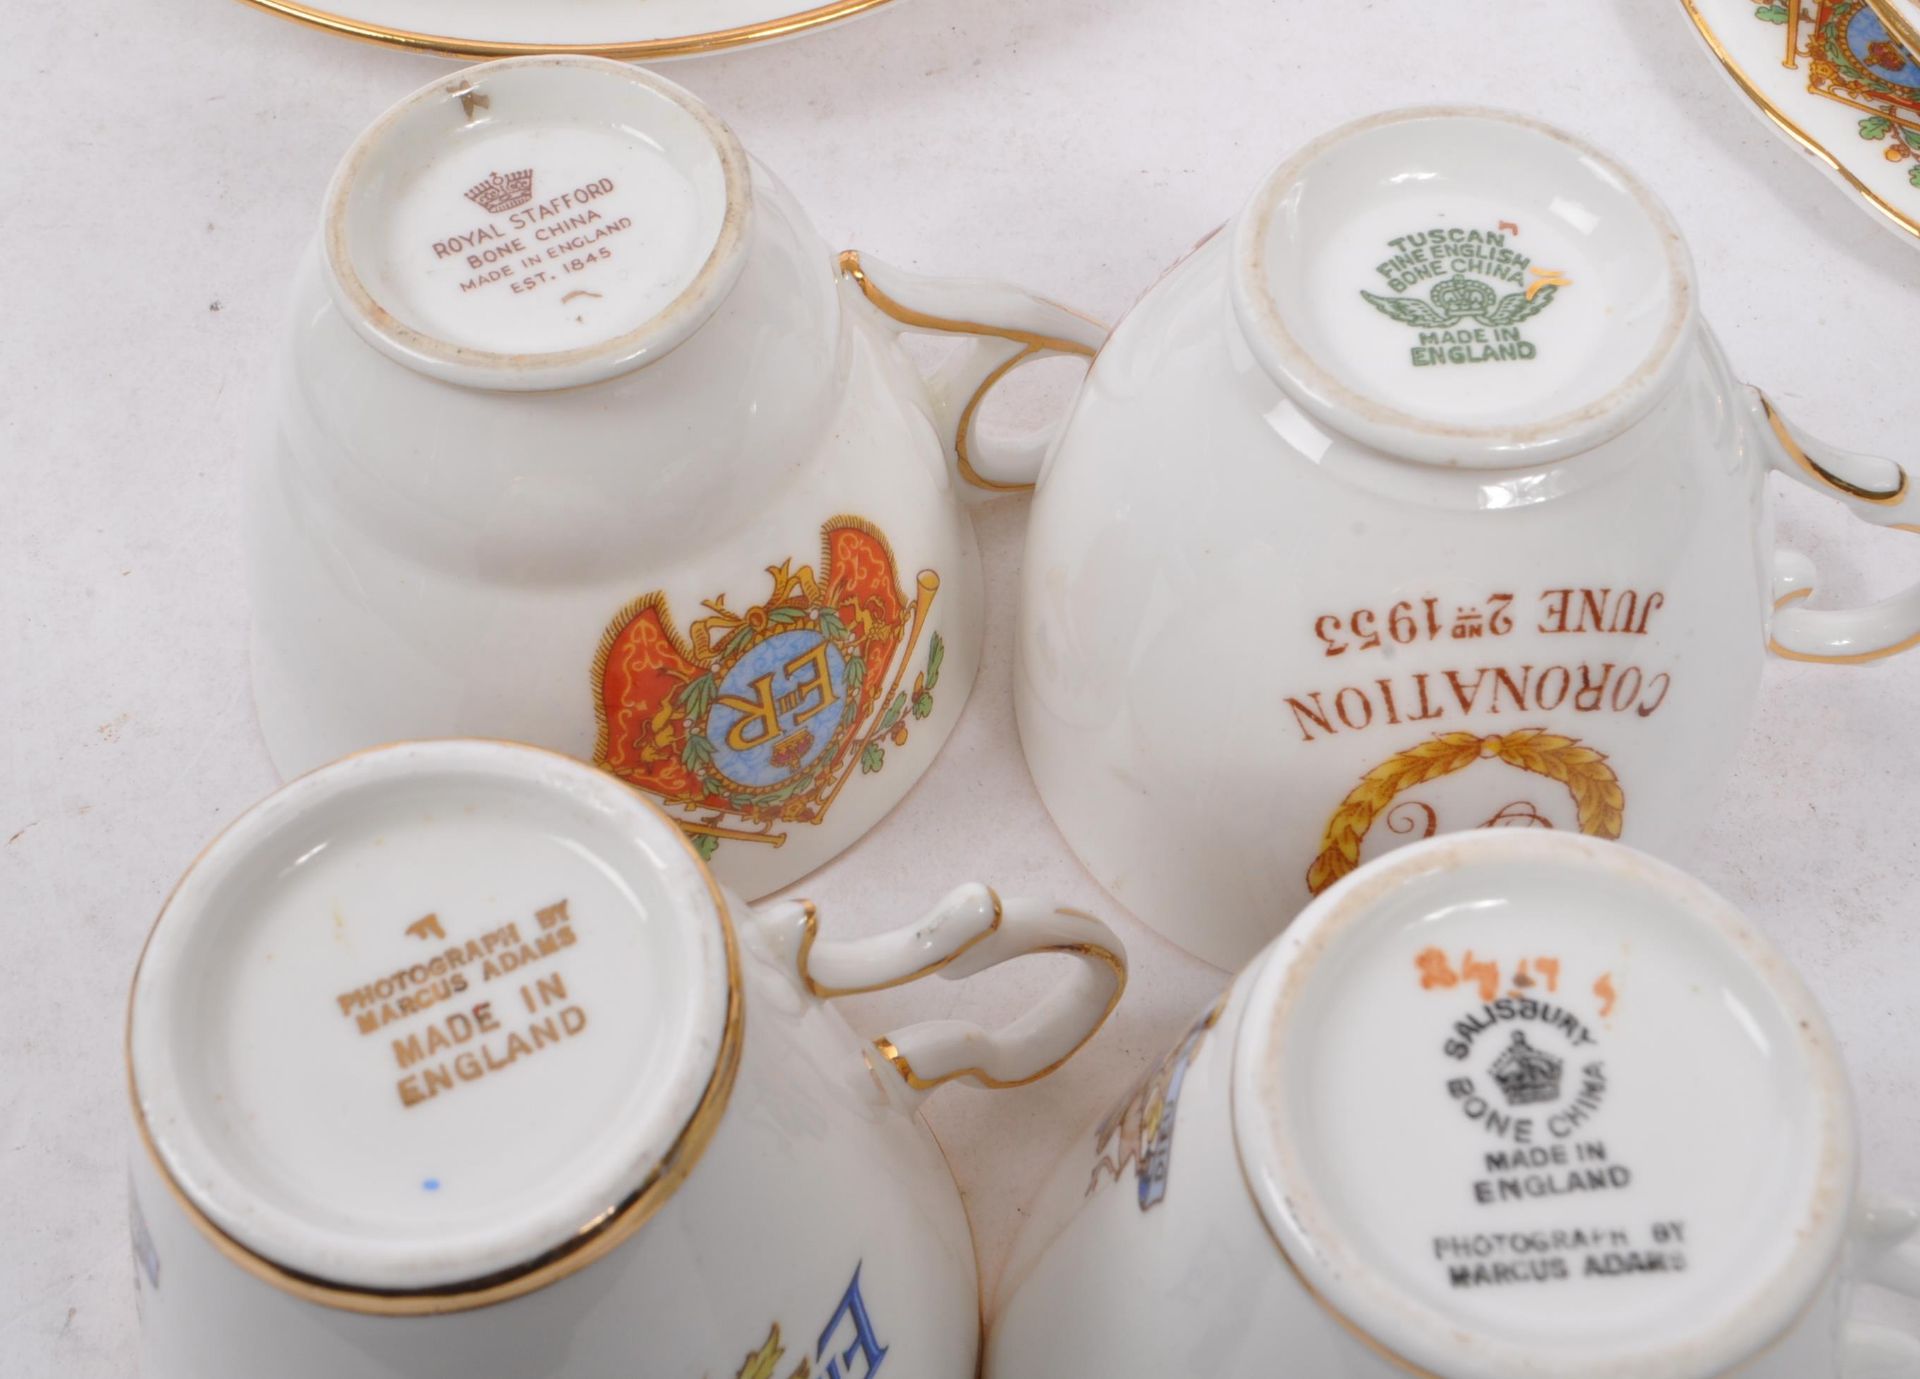 COLLECTION OF QUEEN ELIZABETH II CORONATION CHINA ITEMS - Image 6 of 6